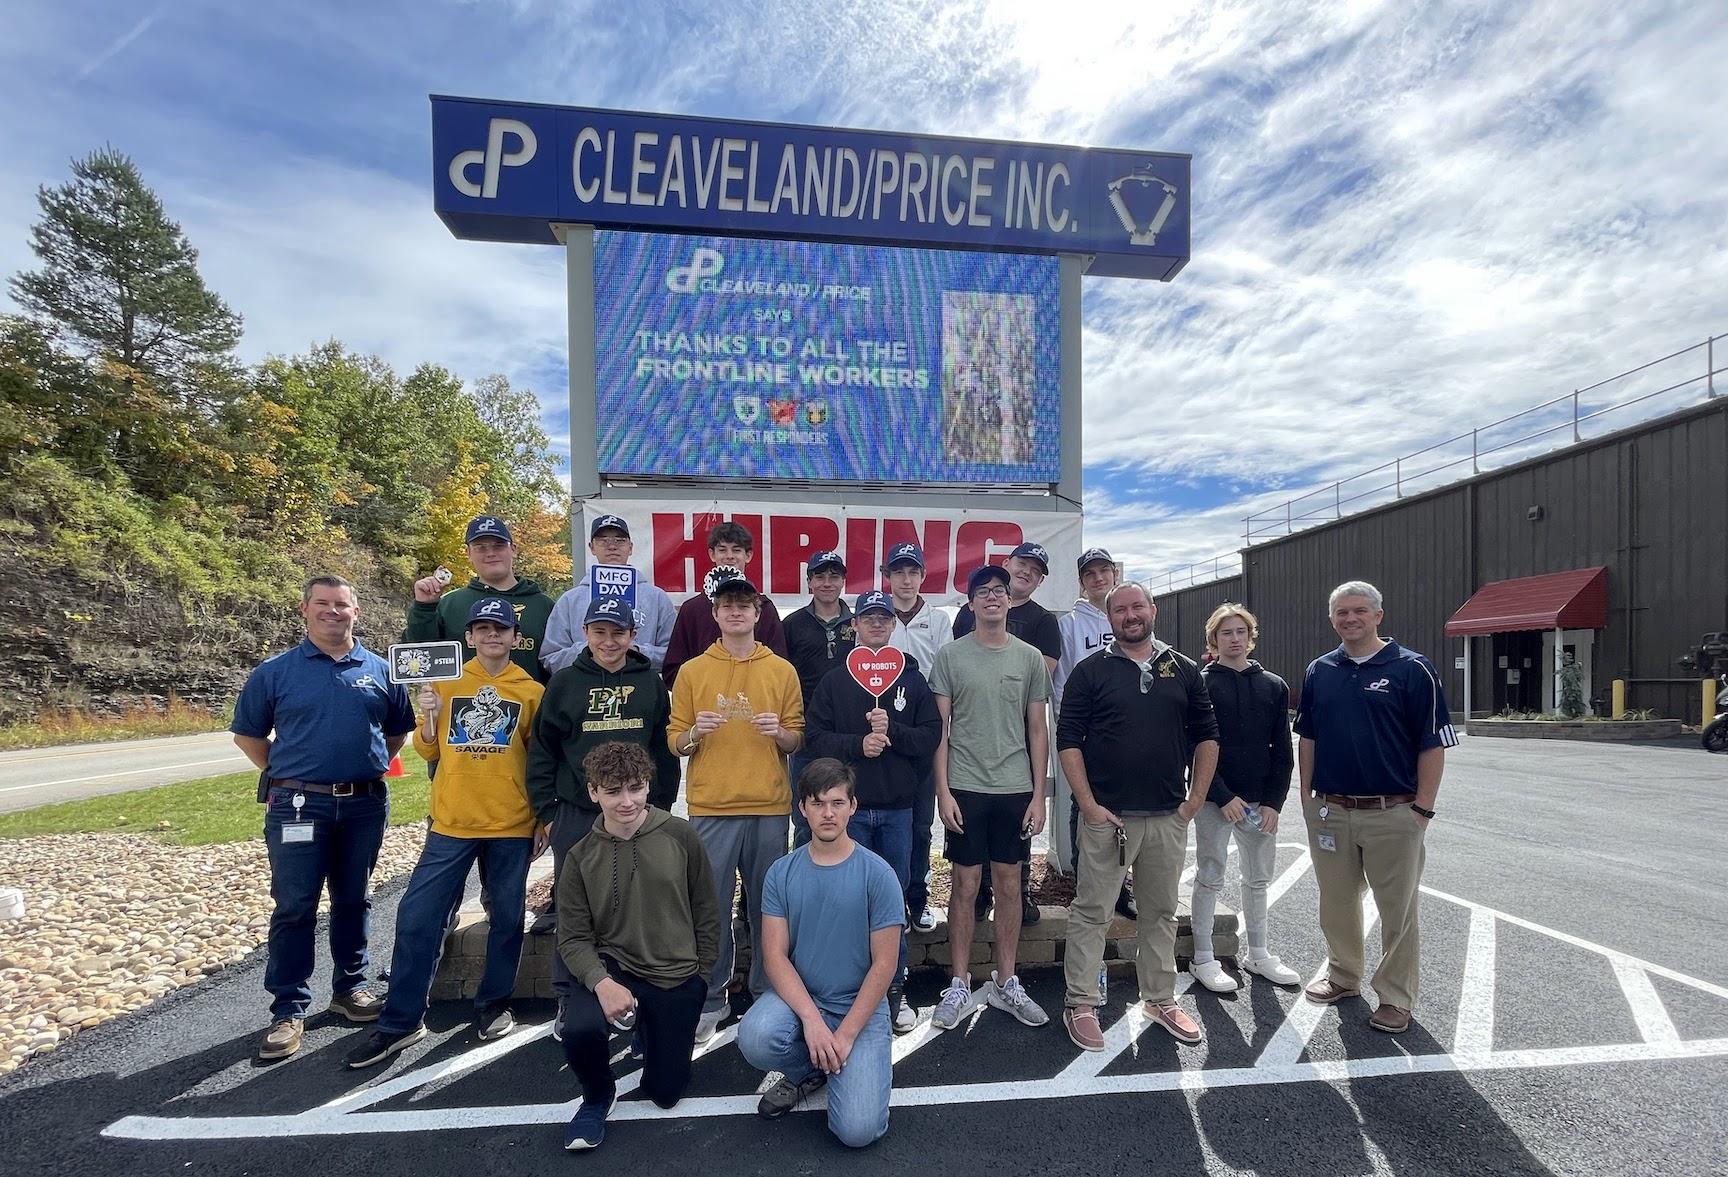 Penn-Trafford students and teachers toured the Cleaveland/Price shop in Trafford